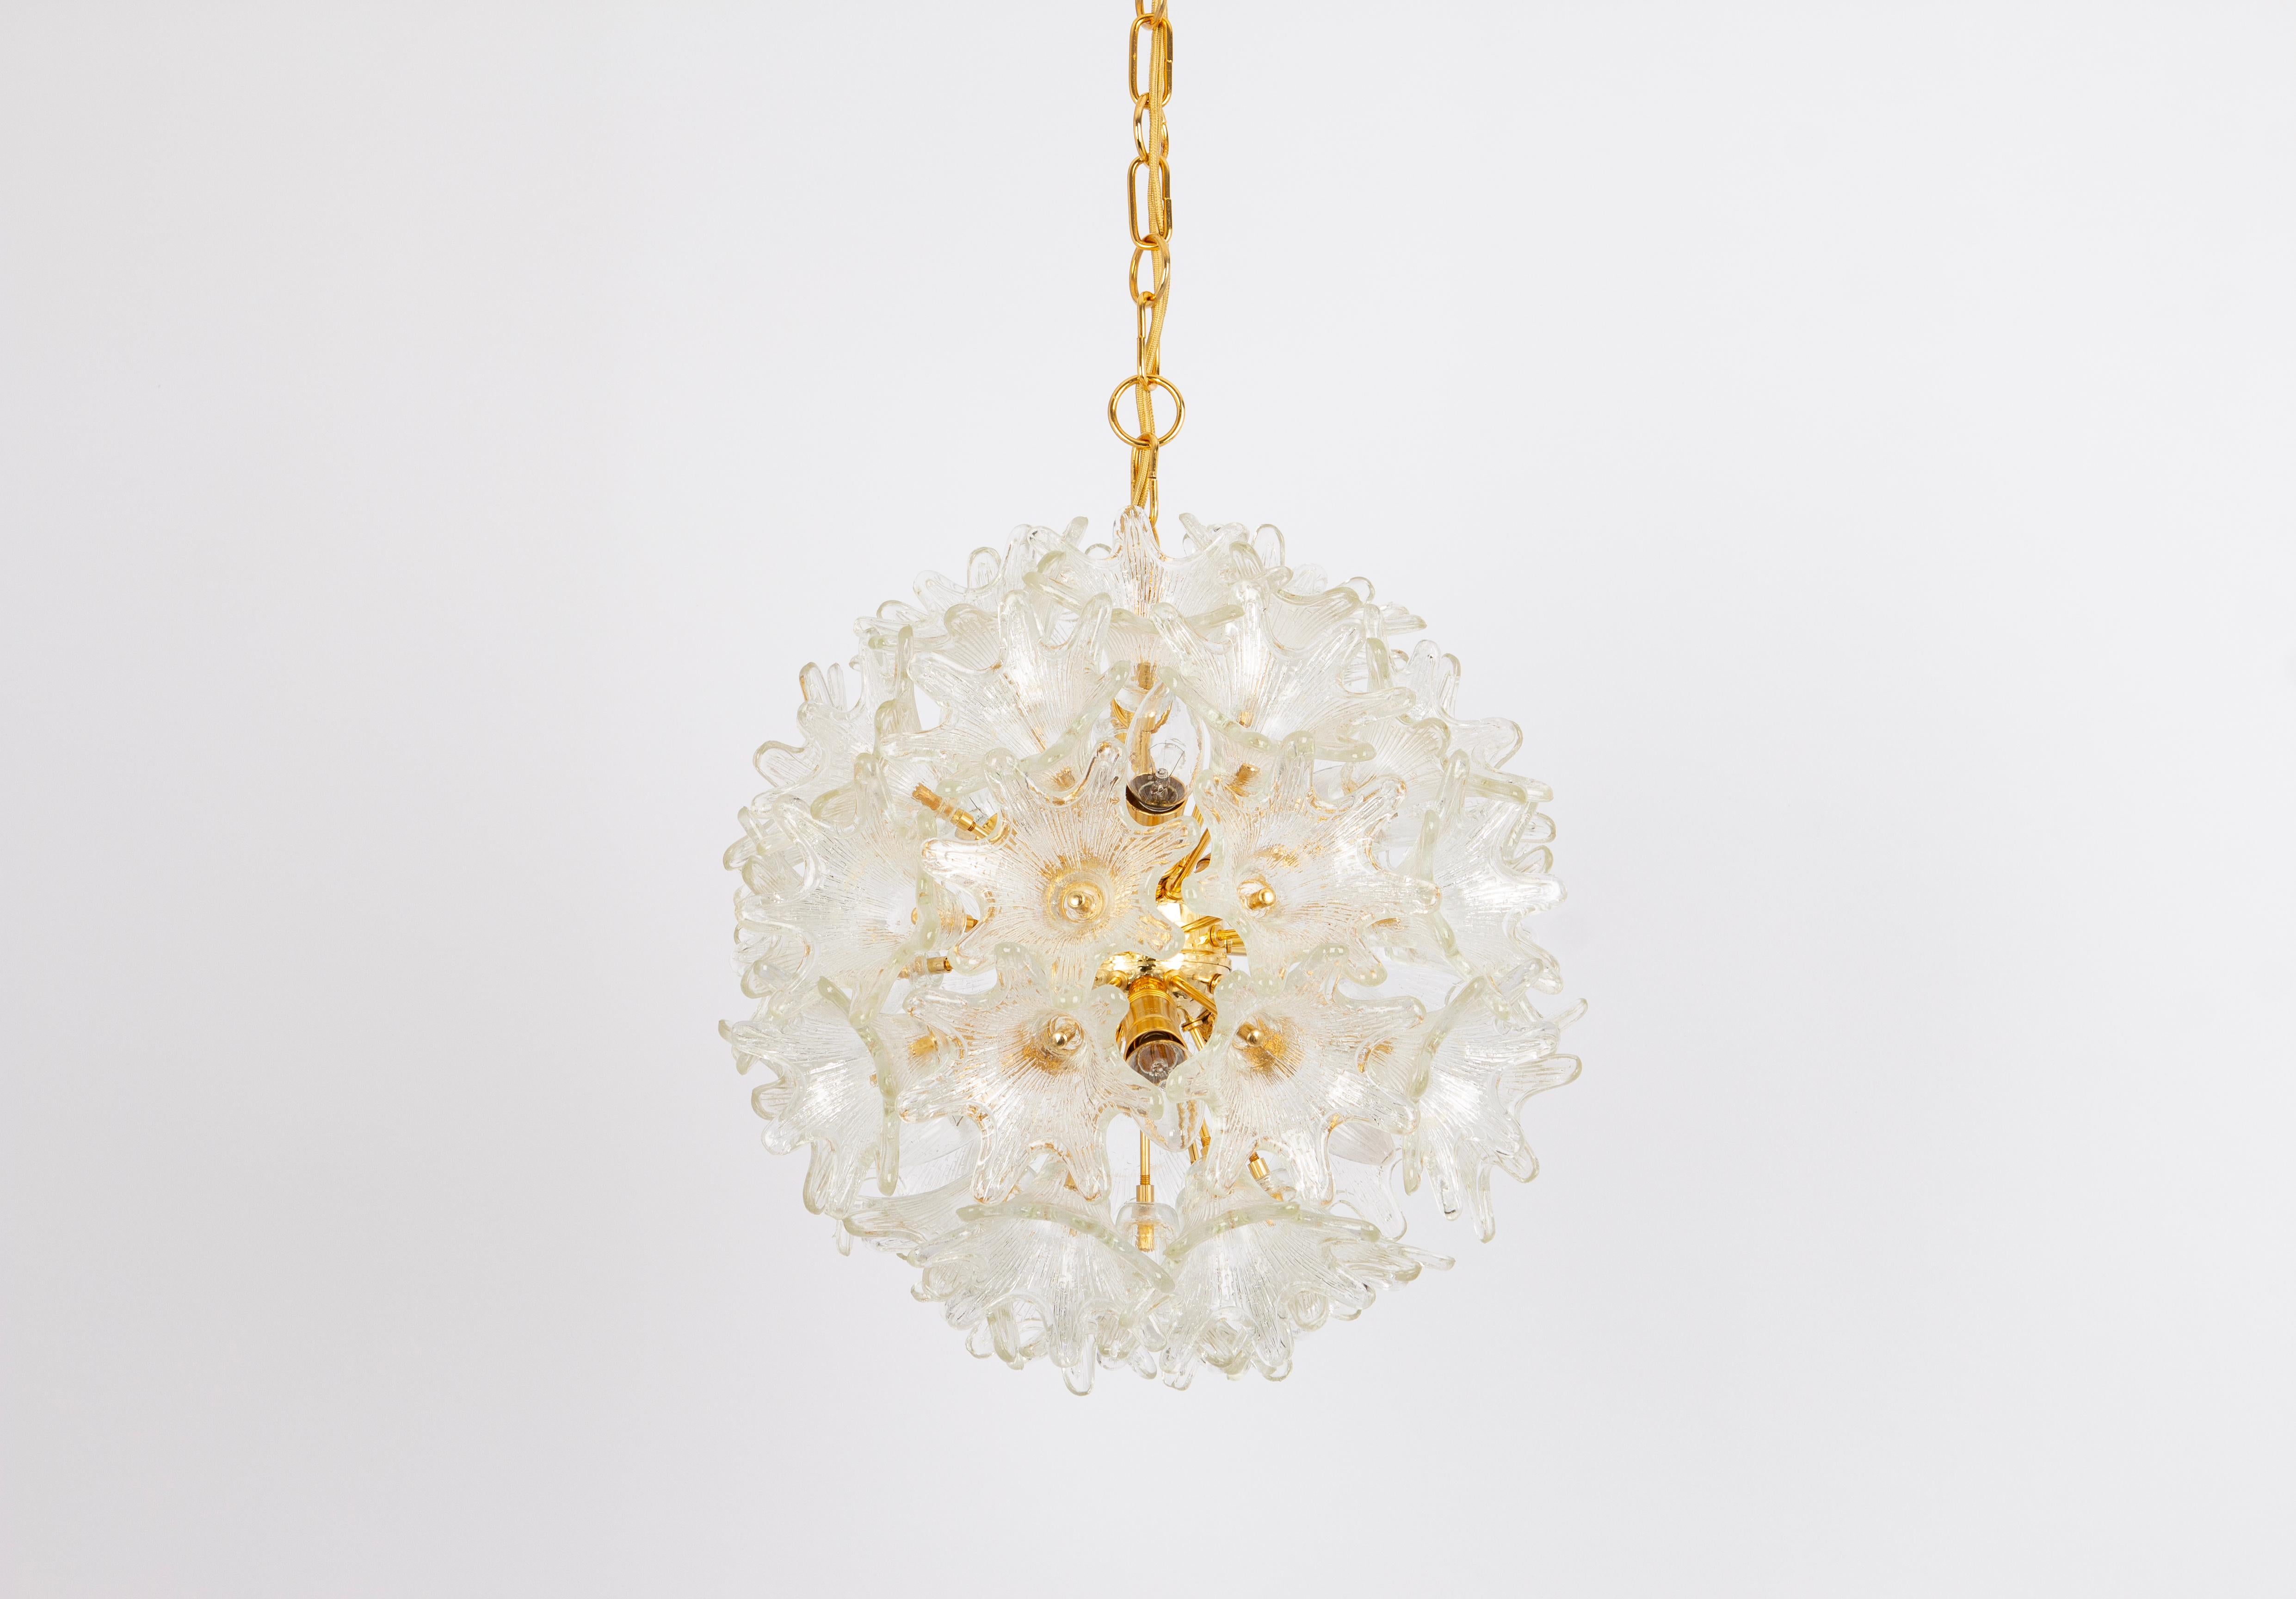 Spectacular Murano glass and brass sunburst flower chandelier by Venini for VeArt, Italy 1970s
Stunning shape and a great light effect.
All glasses are in good condition.
It needs six small-size bulbs (E-14 bulbs) up to 40 watts.
Light bulbs are not